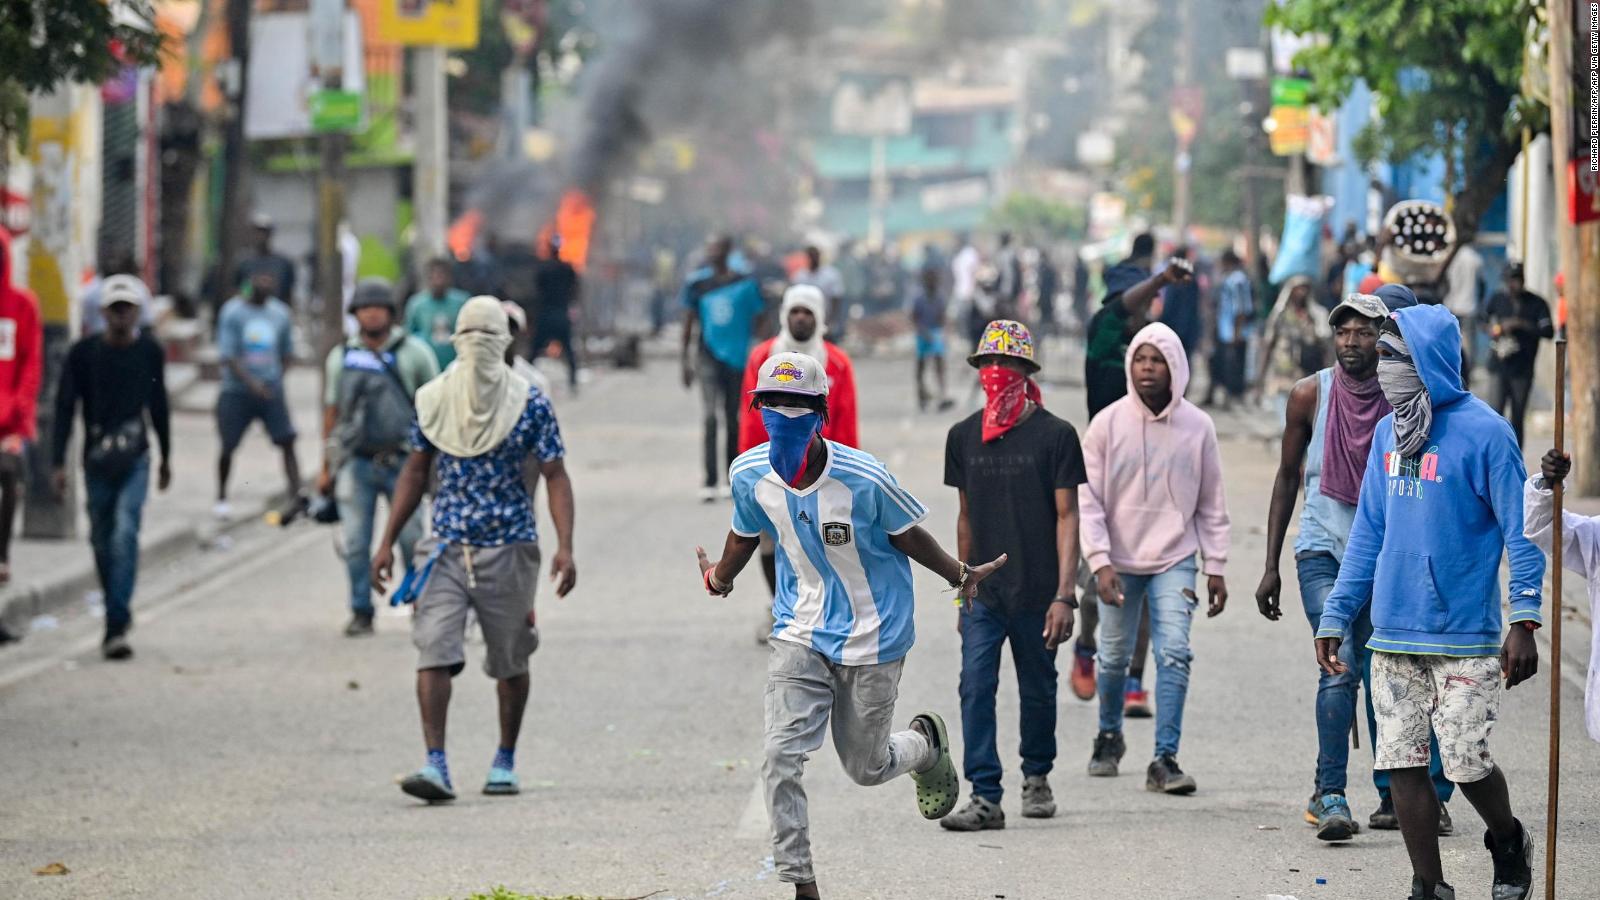 Haiti revolts against gangs and government